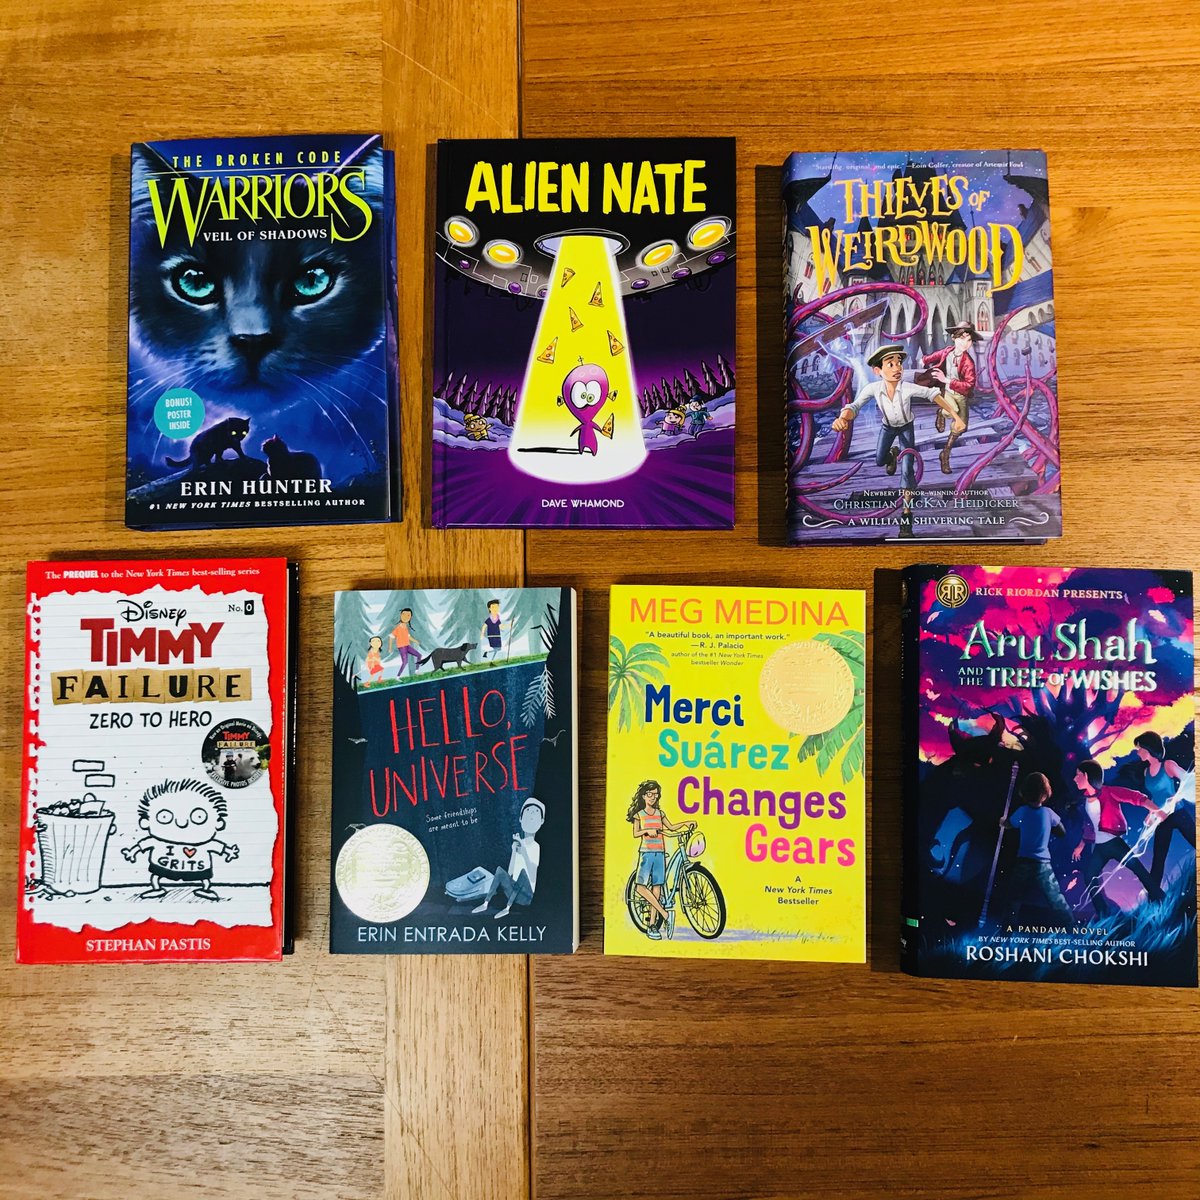 Next up: new middle grade!WARRIORS: VEIL OF SHADOWS by Erin Hunter!TIMMY FAILURE: ZERO TO HERO by  @stephanpastis!ALIEN NATE by  @DaveWhamond! THIEVES OF WEIRDWOOD by Christian McKay Heidicker!ARU SHAH AND THE TREE OF WISHES by  @Roshani_Chokshi!